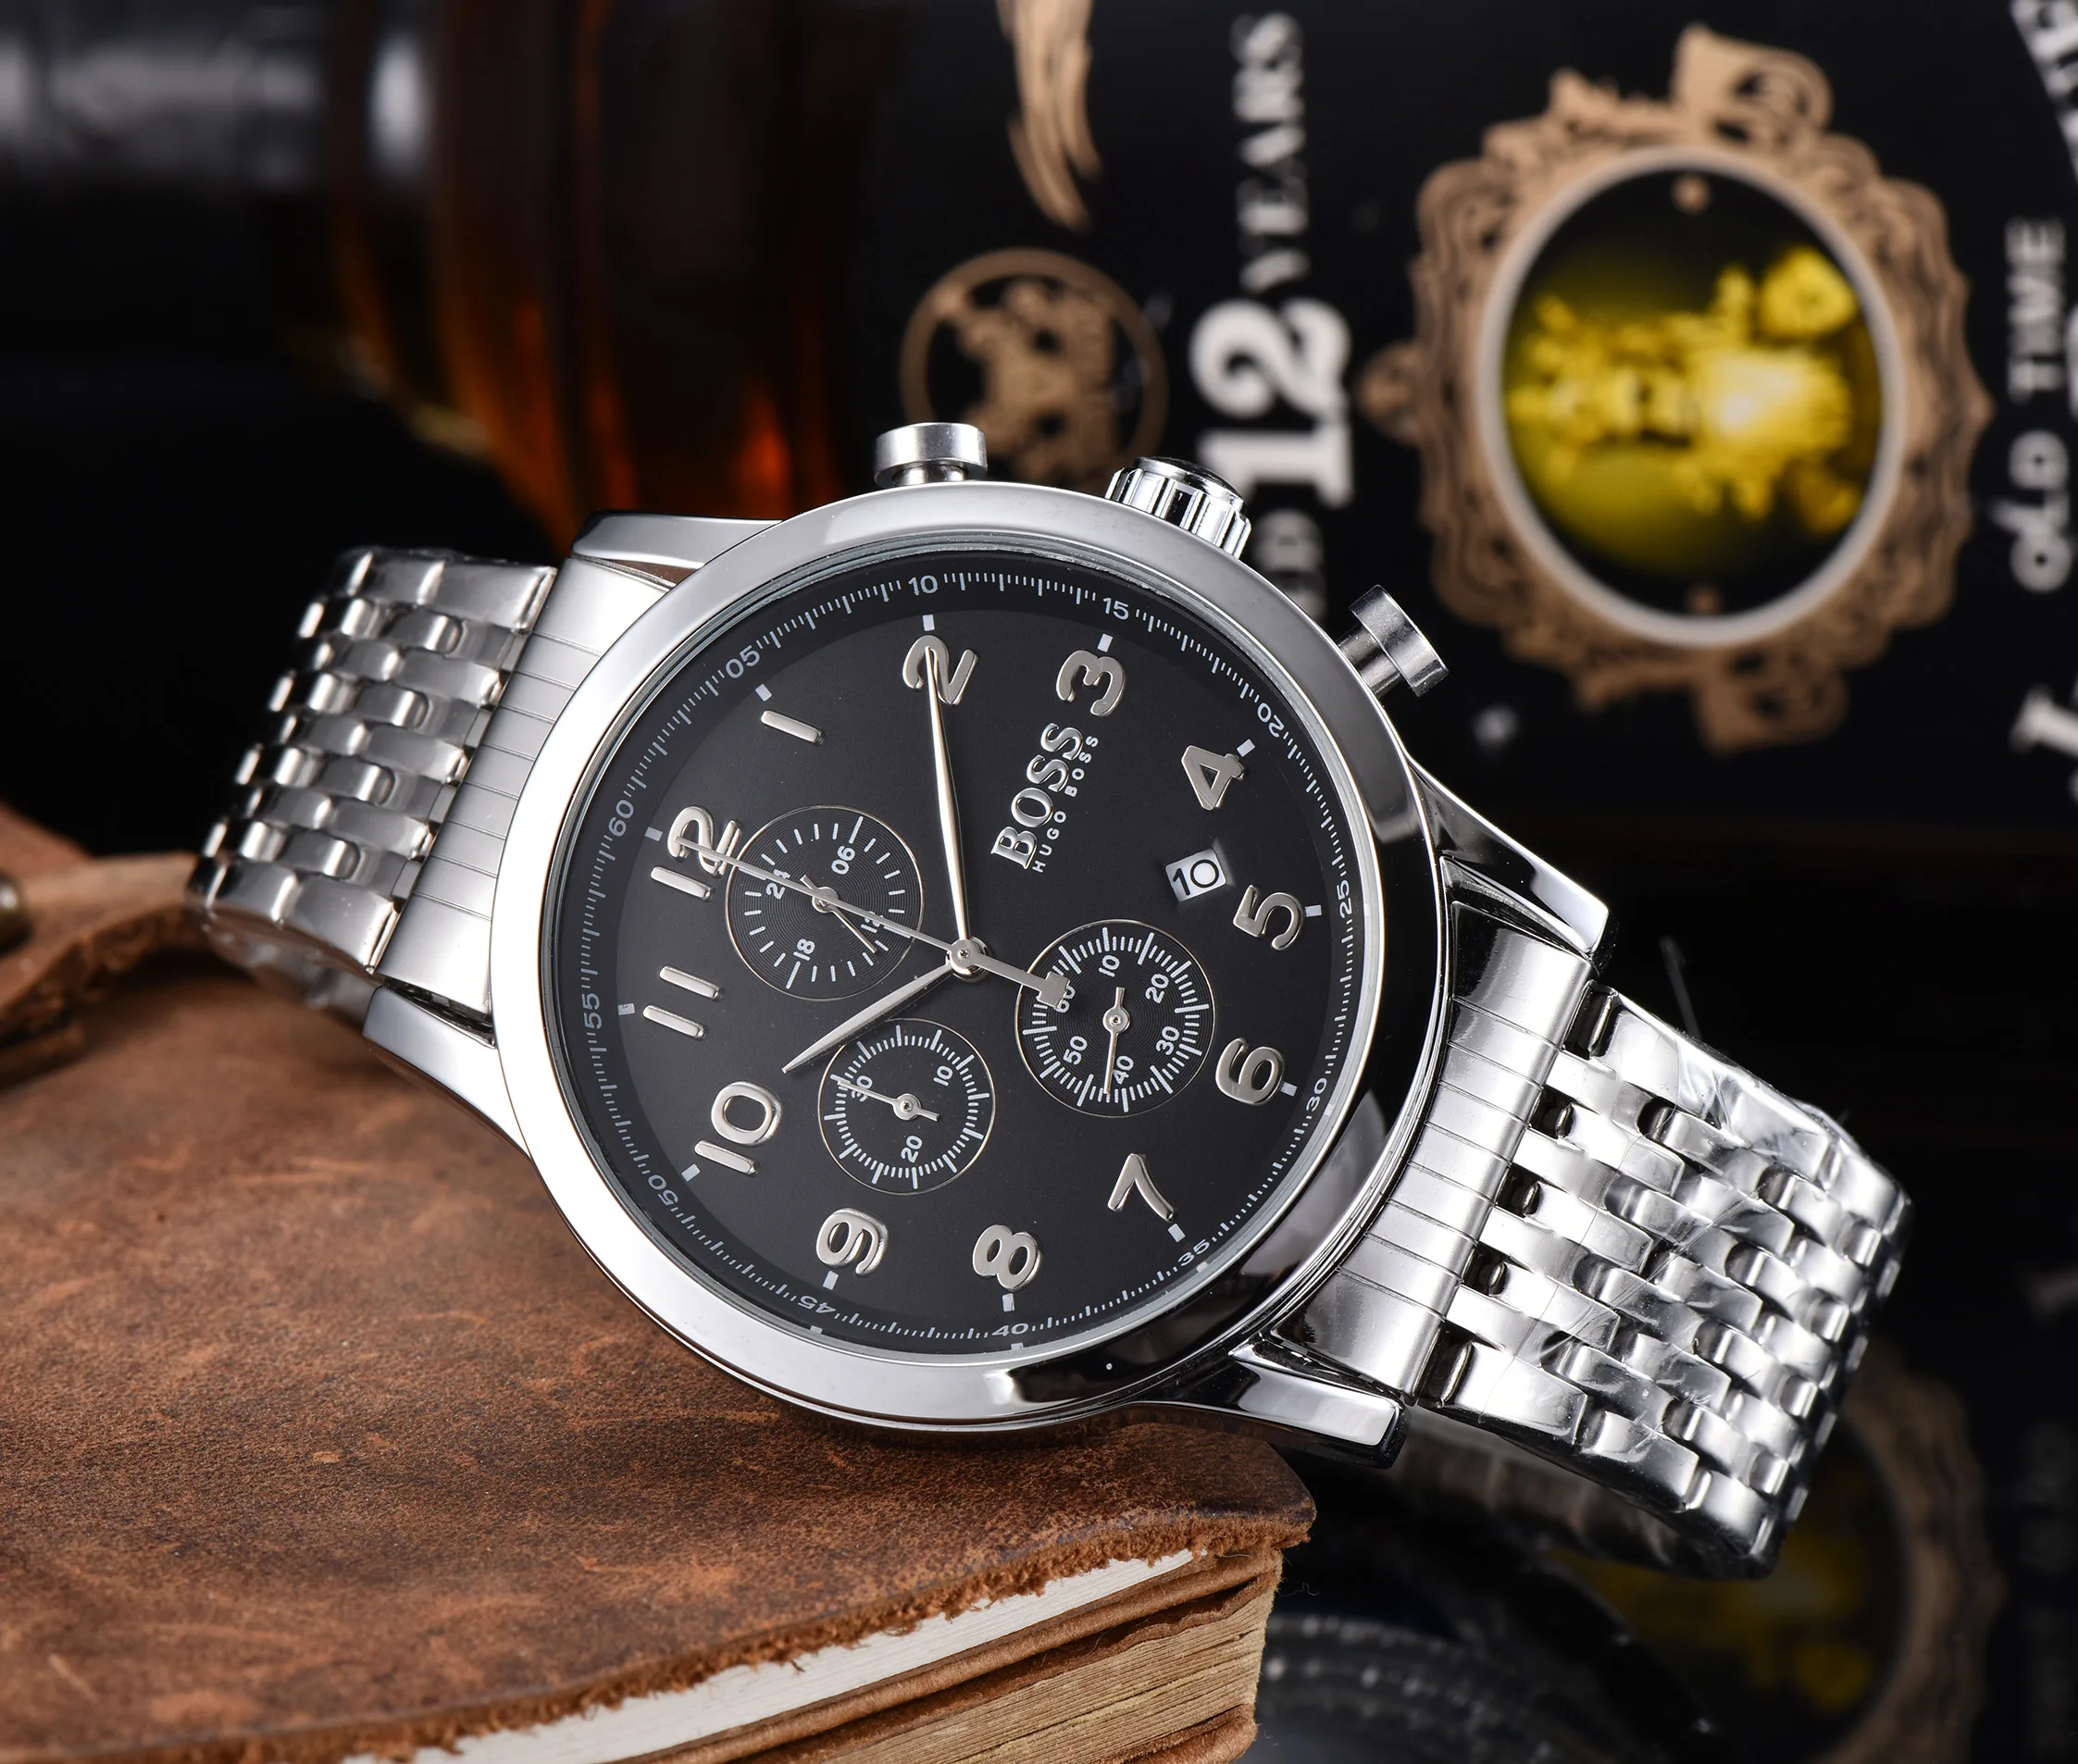 

selling mens watches boss watch quartz movement watch all functional small dial work stopwatch lifestyle waterproof chronograph